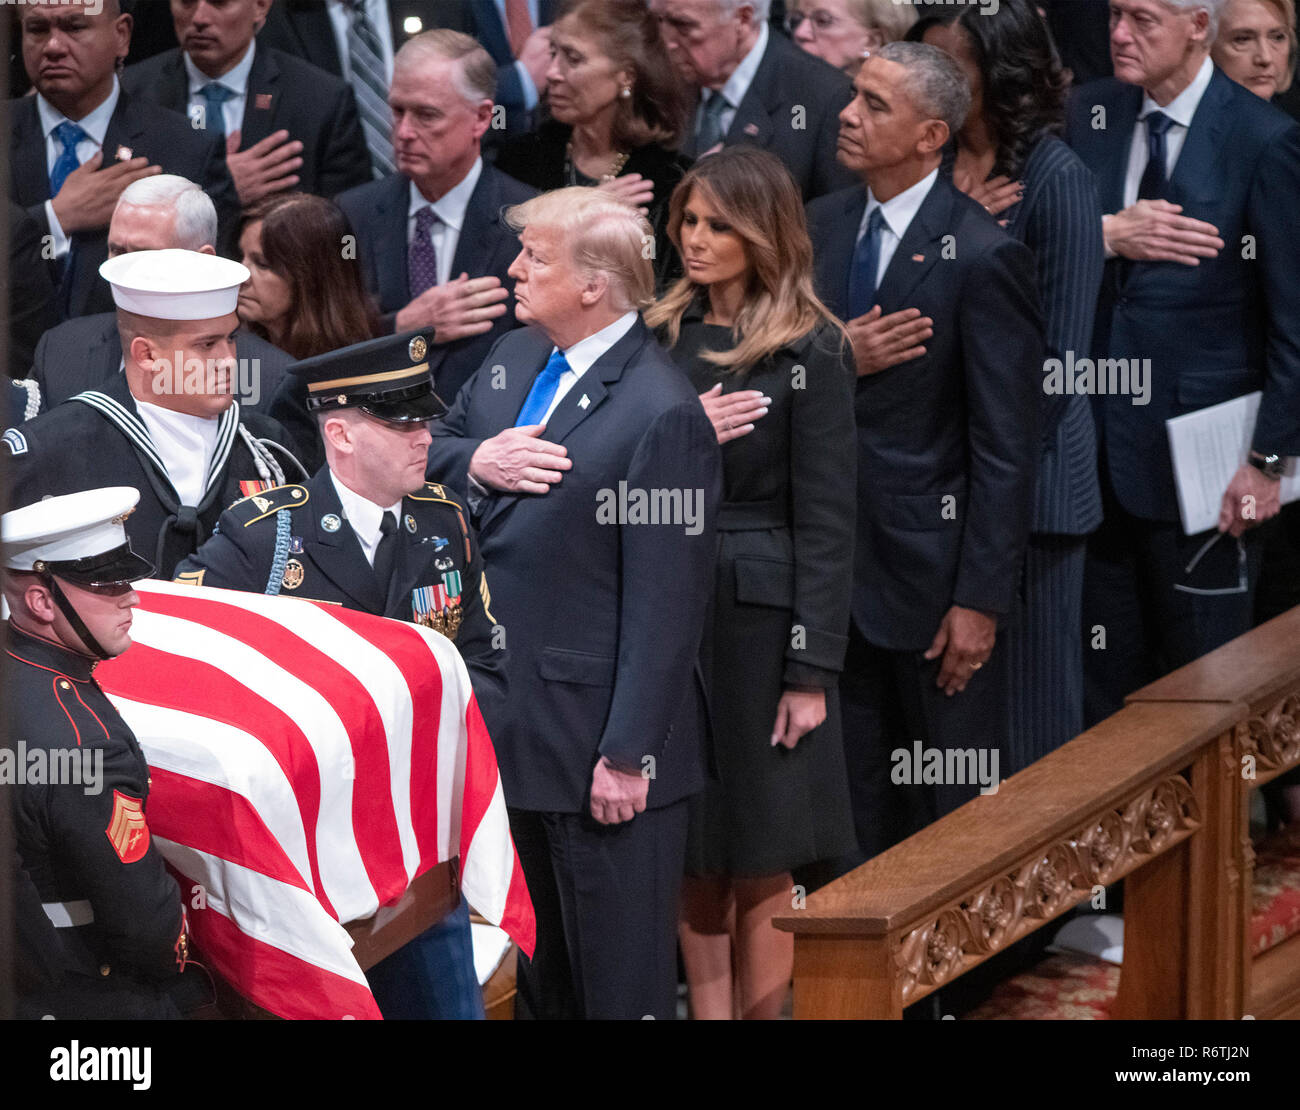 Dignitaries pay their respects as the casket containing the remains of the late former United States President George H.W. Bush at the National funeral service in his honor at the Washington National Cathedral in Washington, DC on Wednesday, December 5, 2018. Front row: United States President Donald J. Trump, first lady Melania Trump, former US President Barack Obama, and former US President Bill Clinton. Second row: former US Vice President Dan Quayle and Marilyn Quayle. Credit: Ron Sachs/CNP (RESTRICTION: NO New York or New Jersey Newspapers or newspapers within a 75 mile radius of New Stock Photo